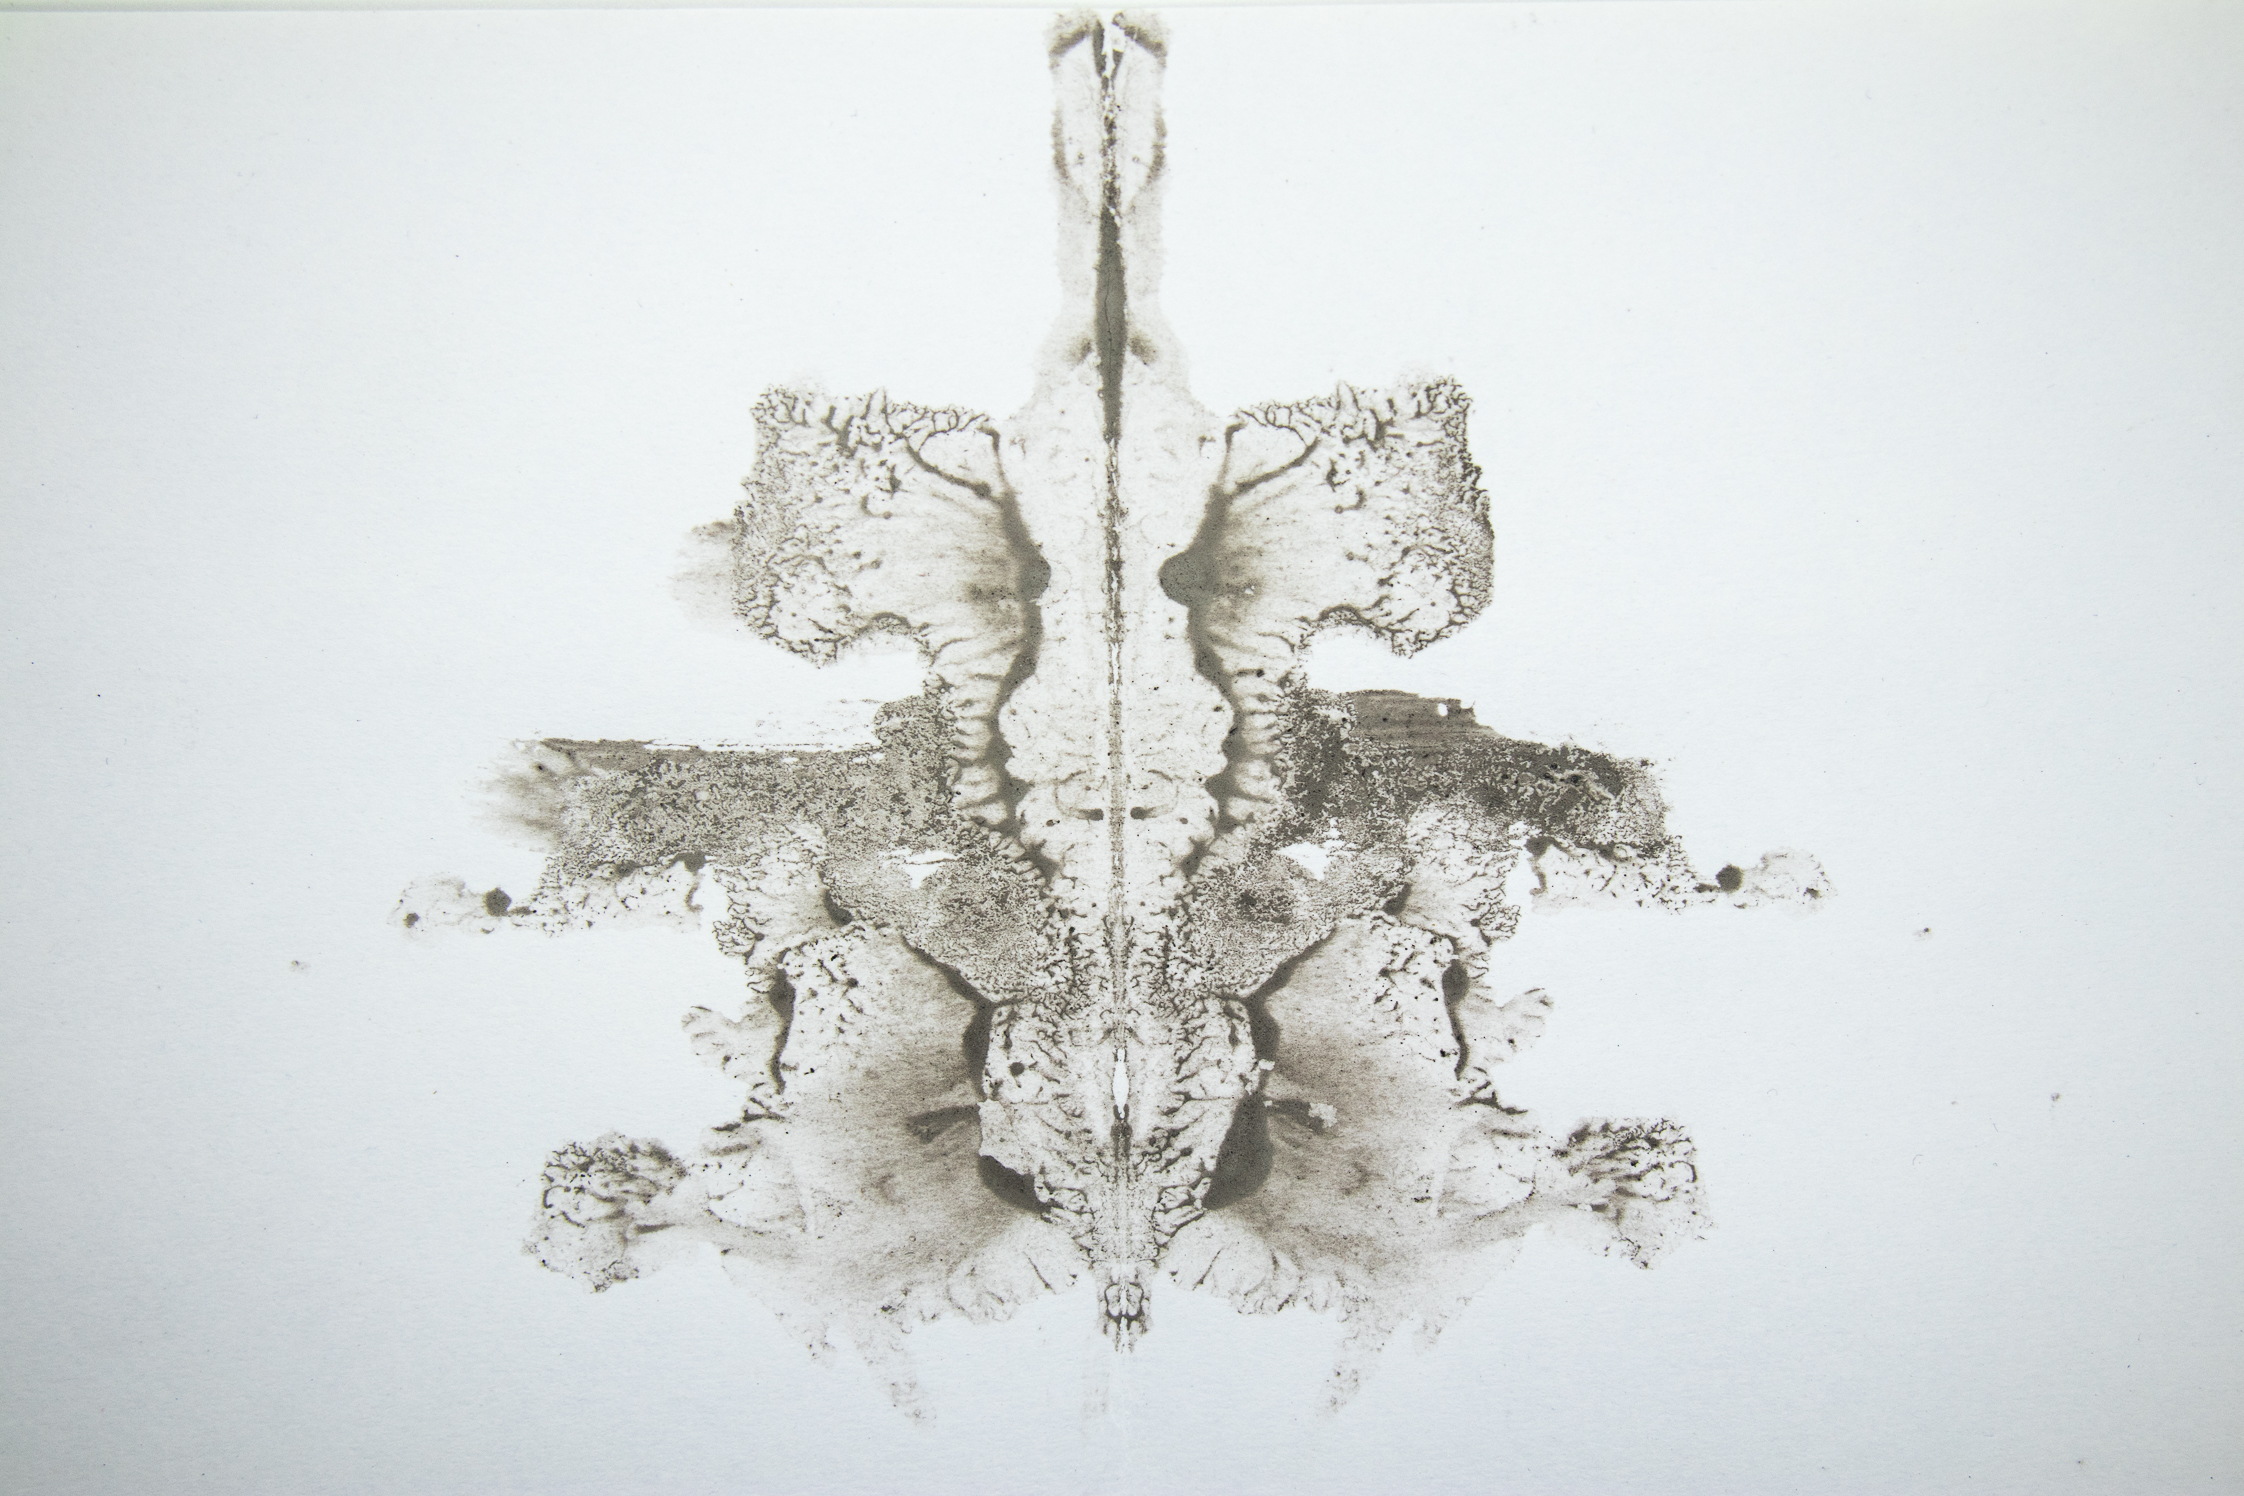 Rorschach lightbox uncleaned (19 of 66).jpg